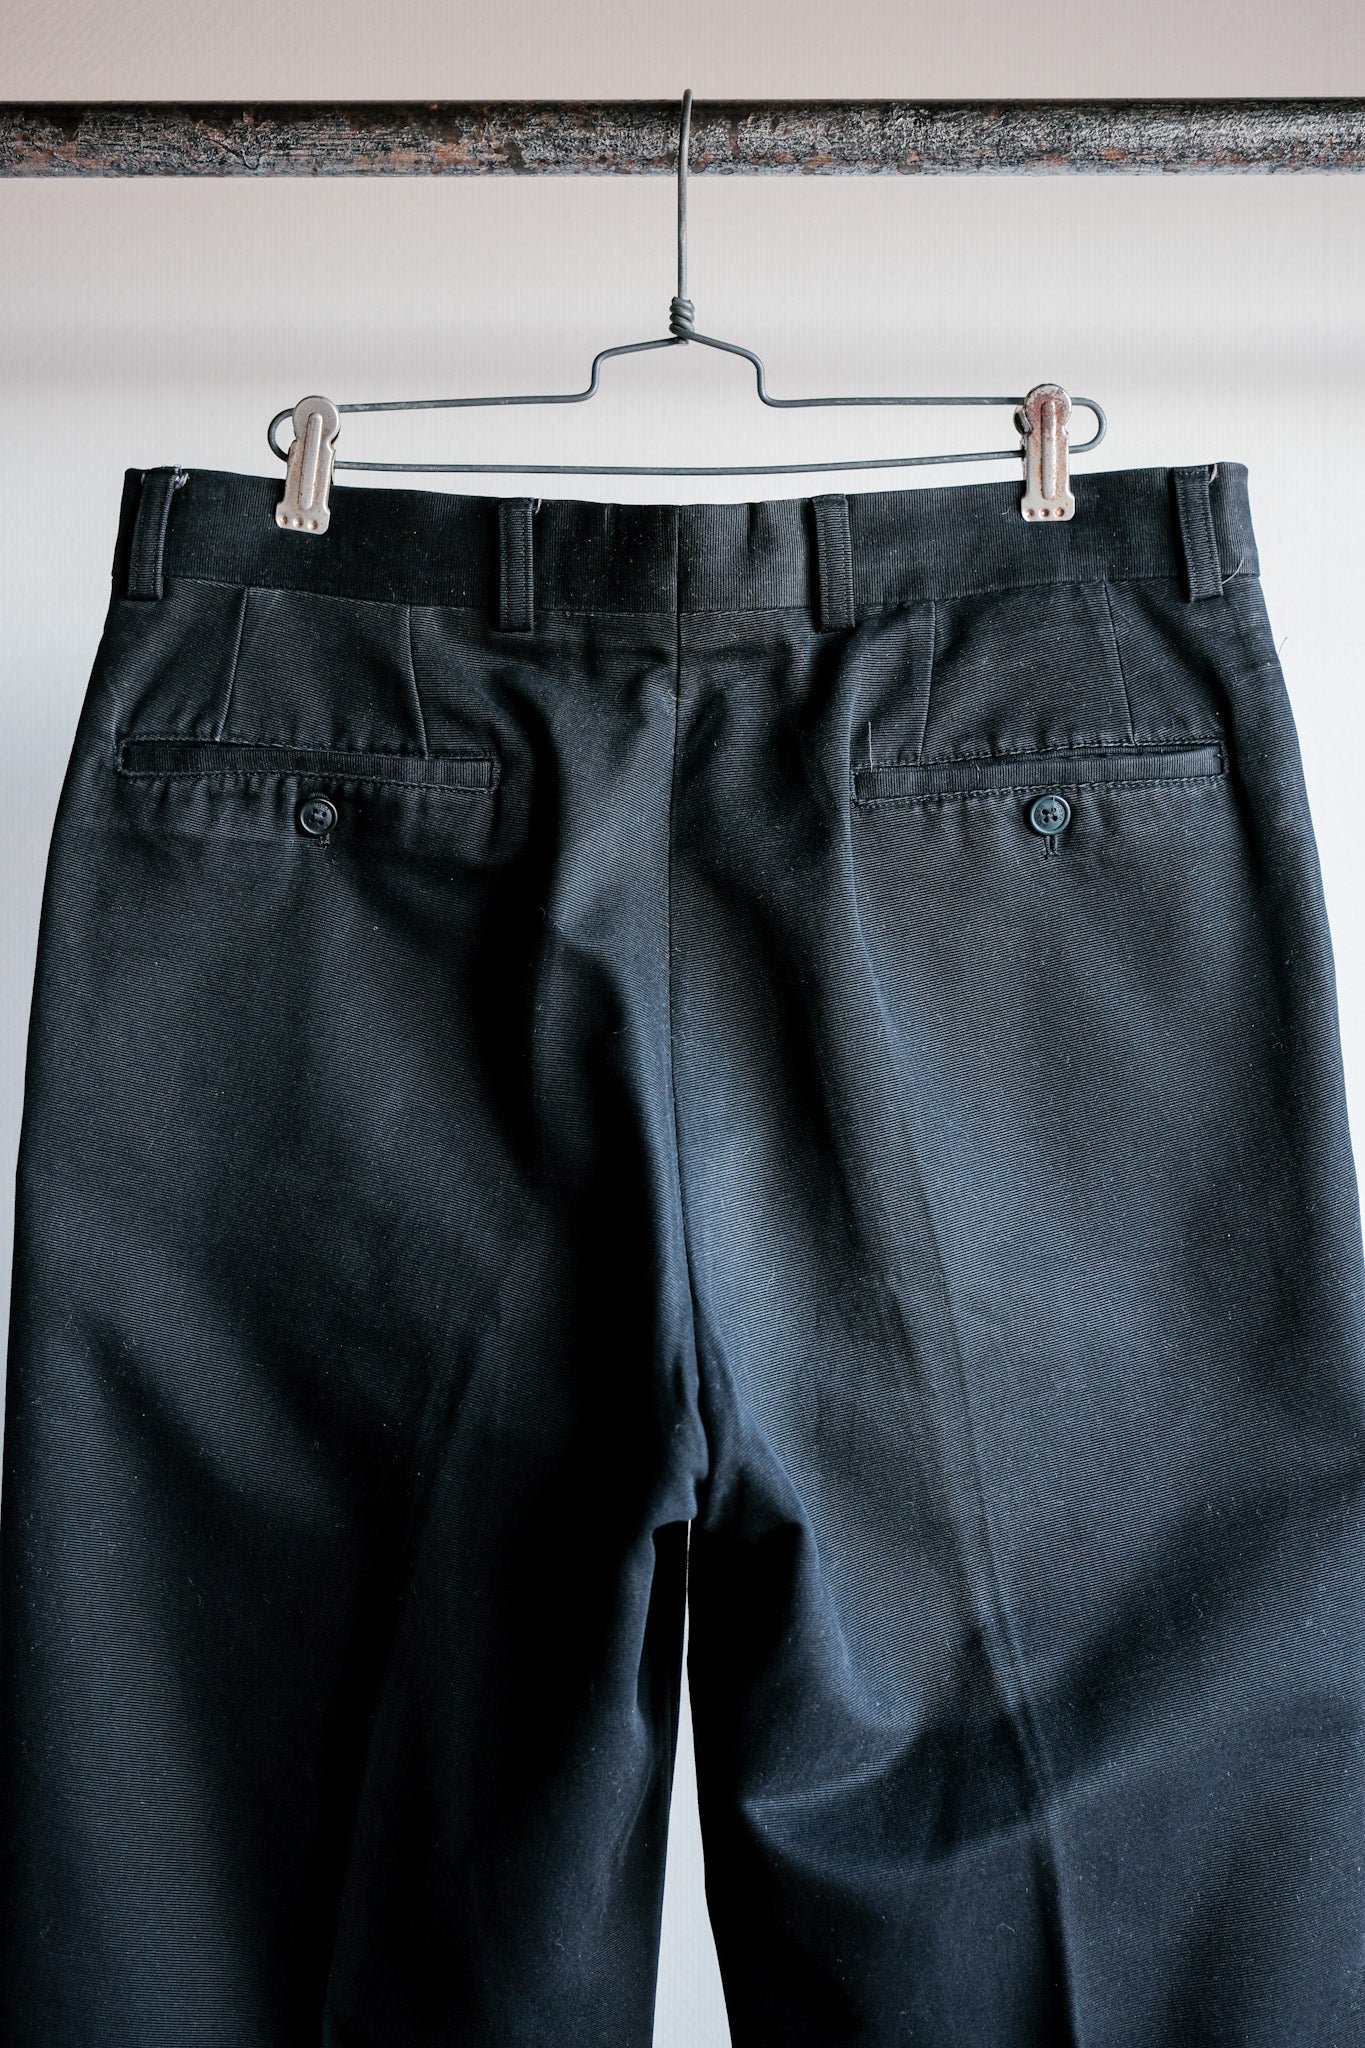 【~00's】Old ARNYS PARIS Turn Up Cotton Trousers Size.42